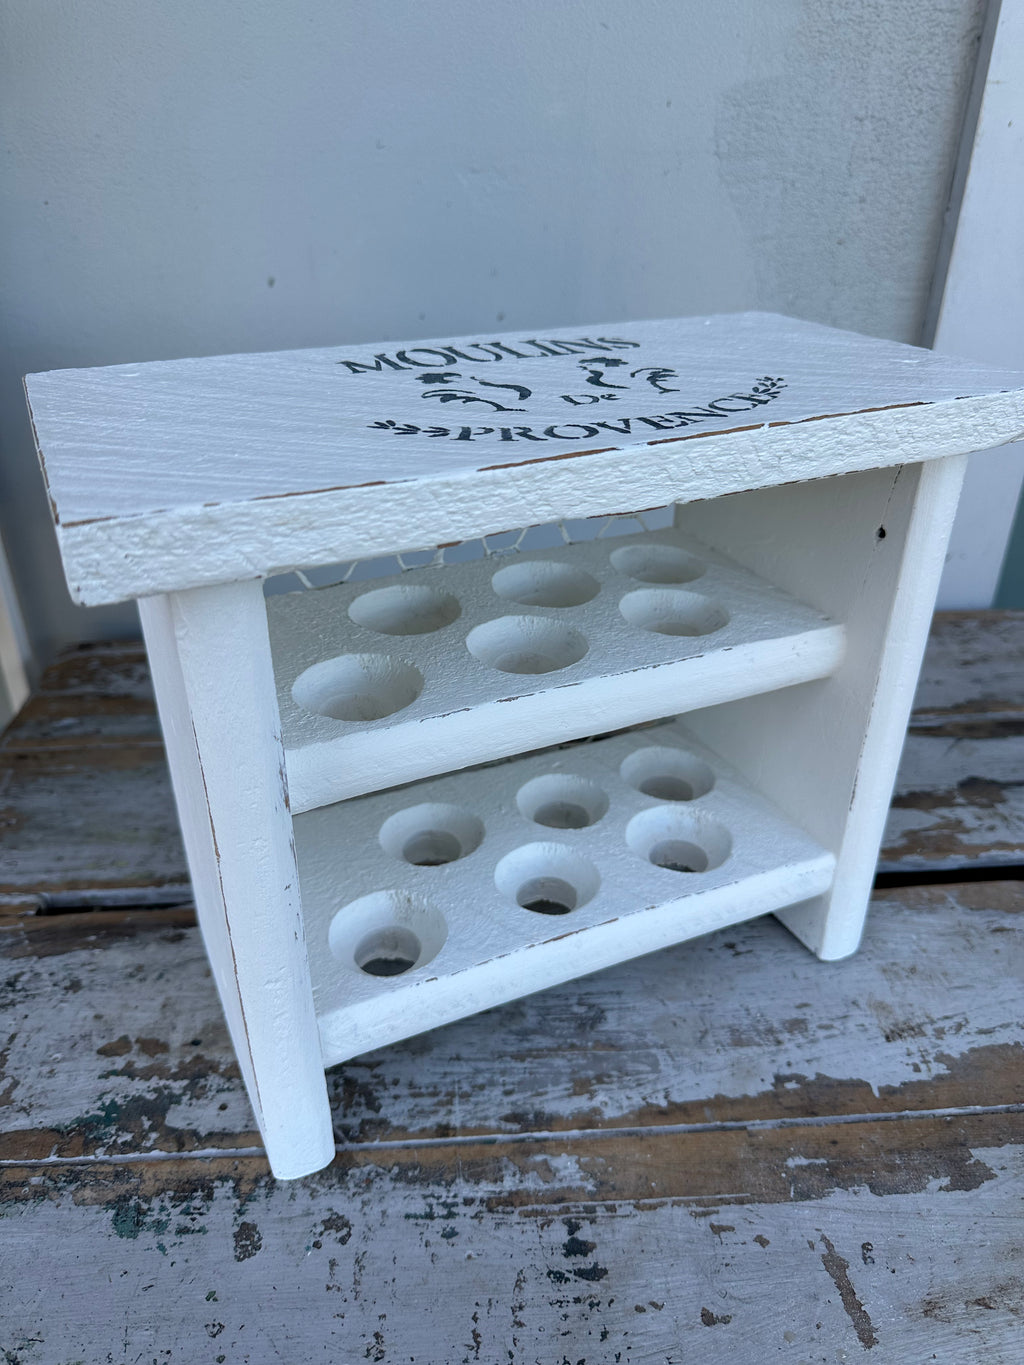 Wooden Egg Stand